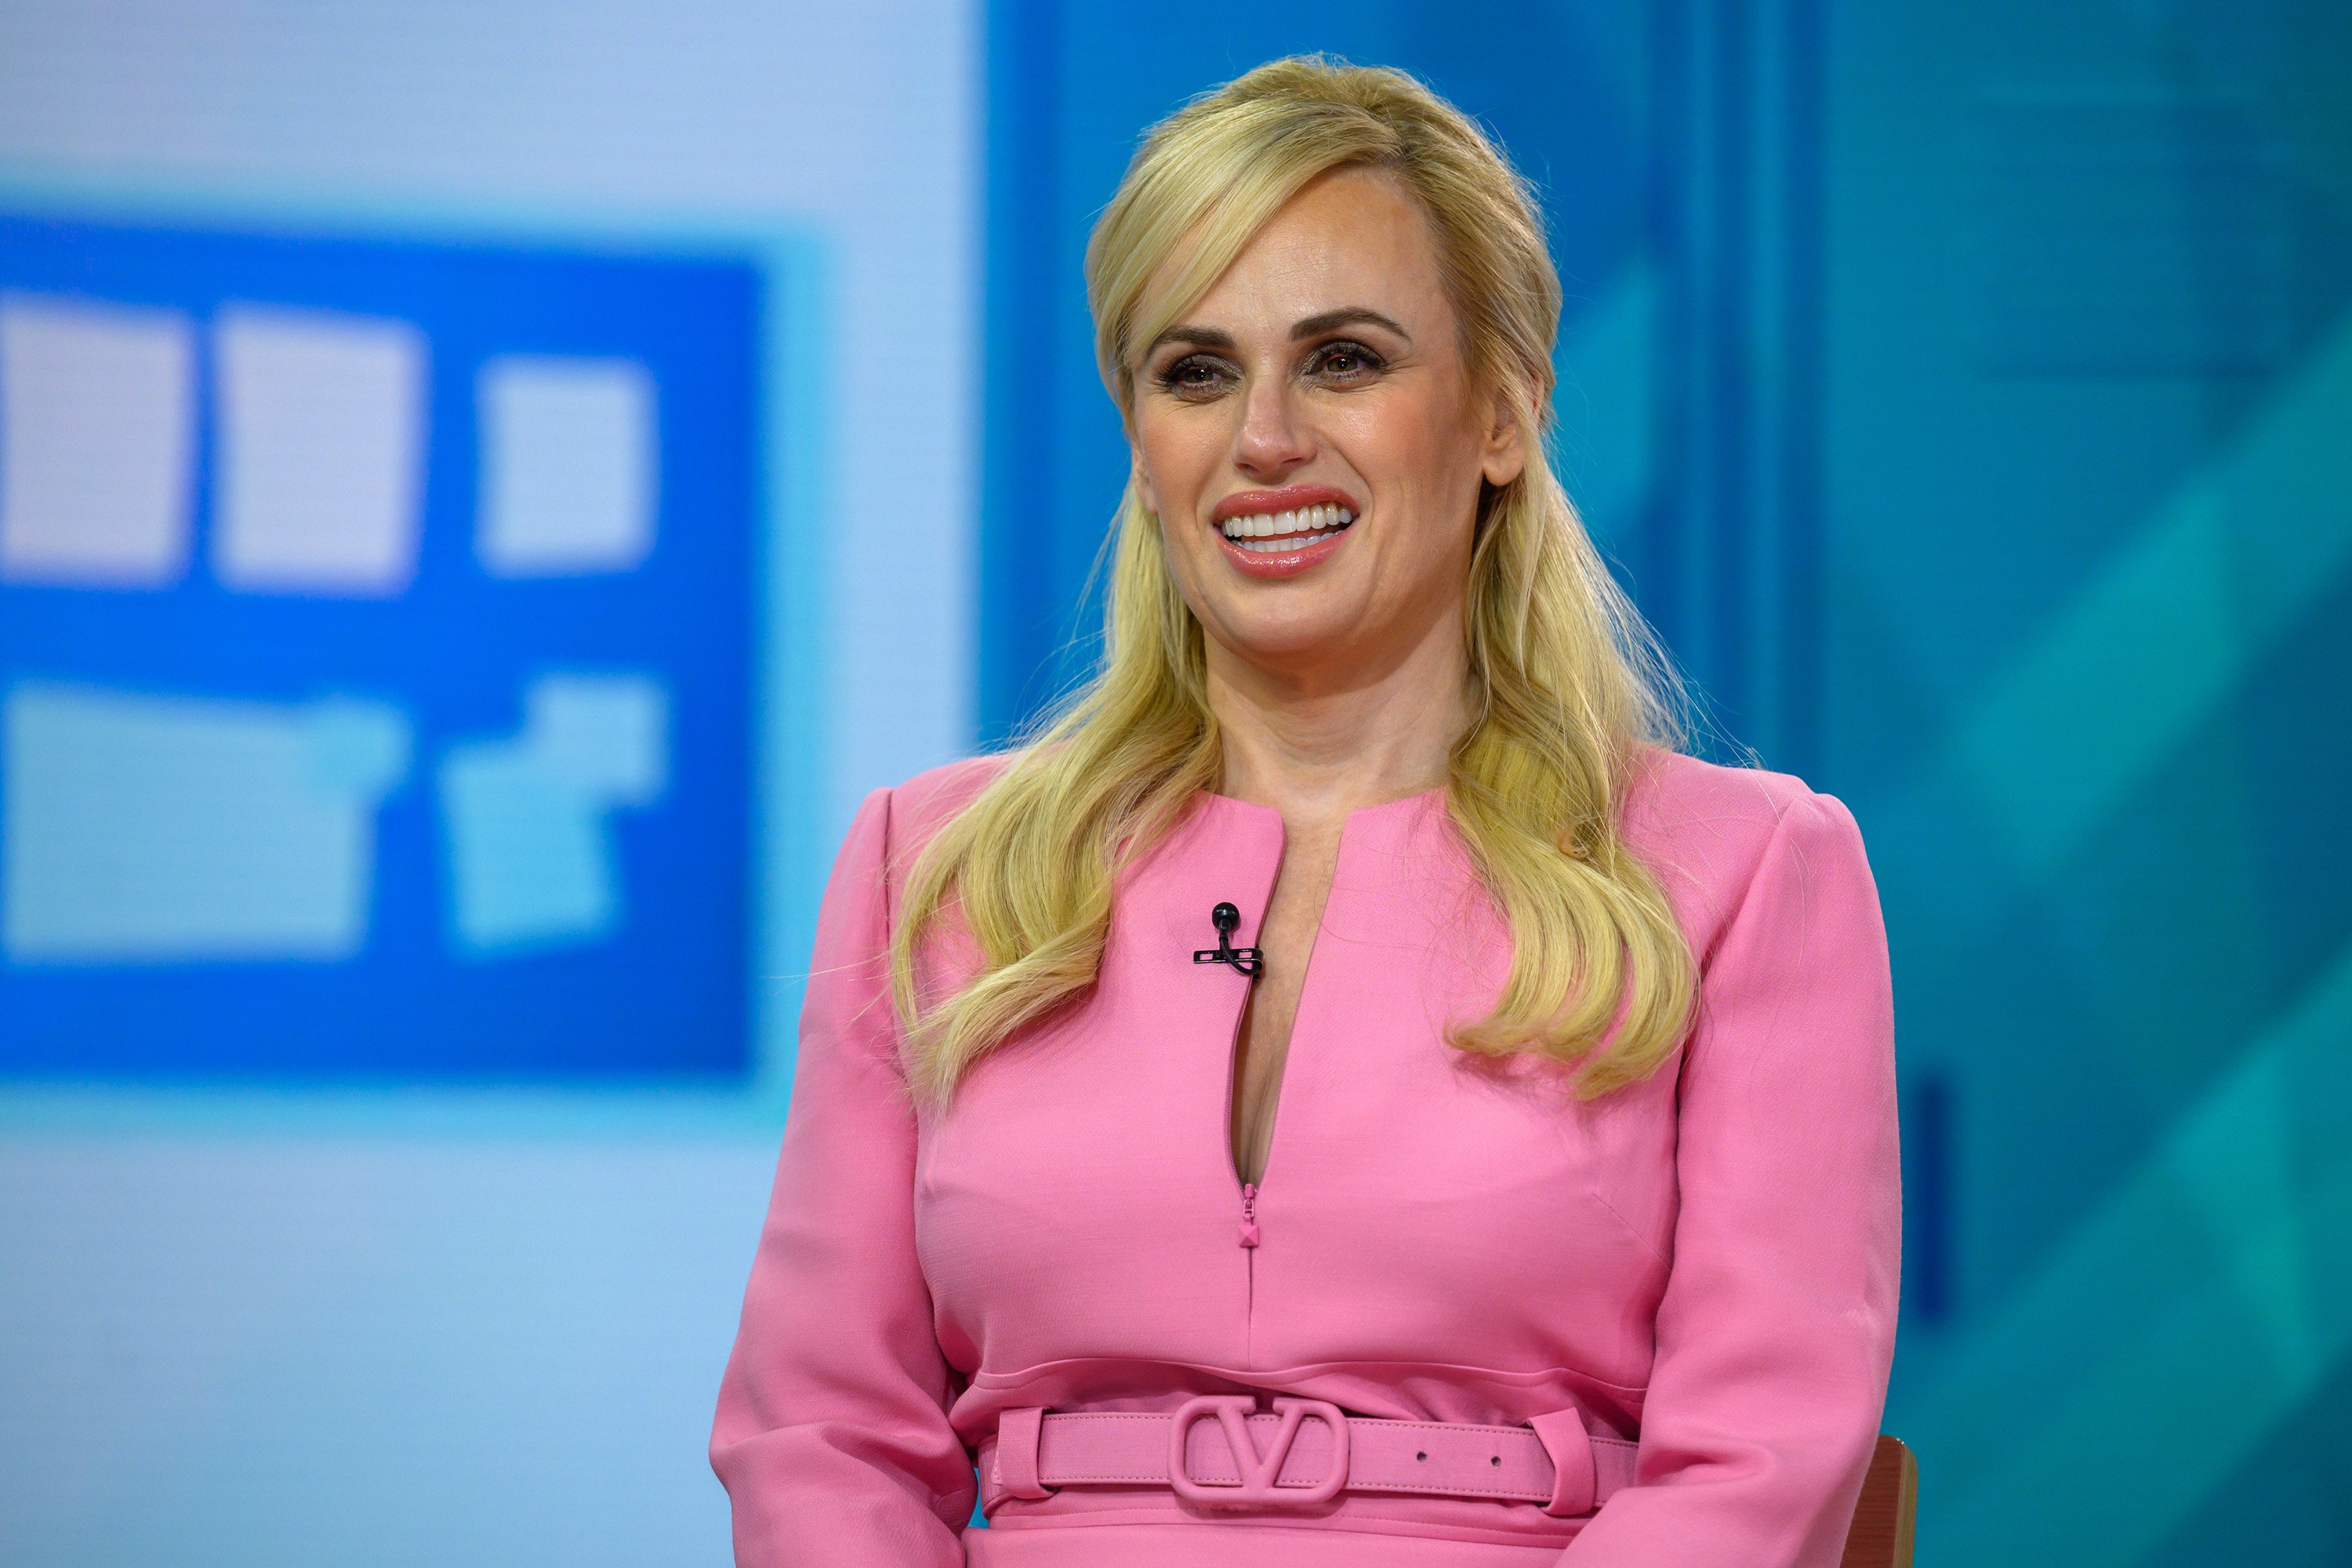 Actress Rebel Wilson during an appearance on the "Today" show  Season 71 on May 5, 2022. / Source: Getty Images